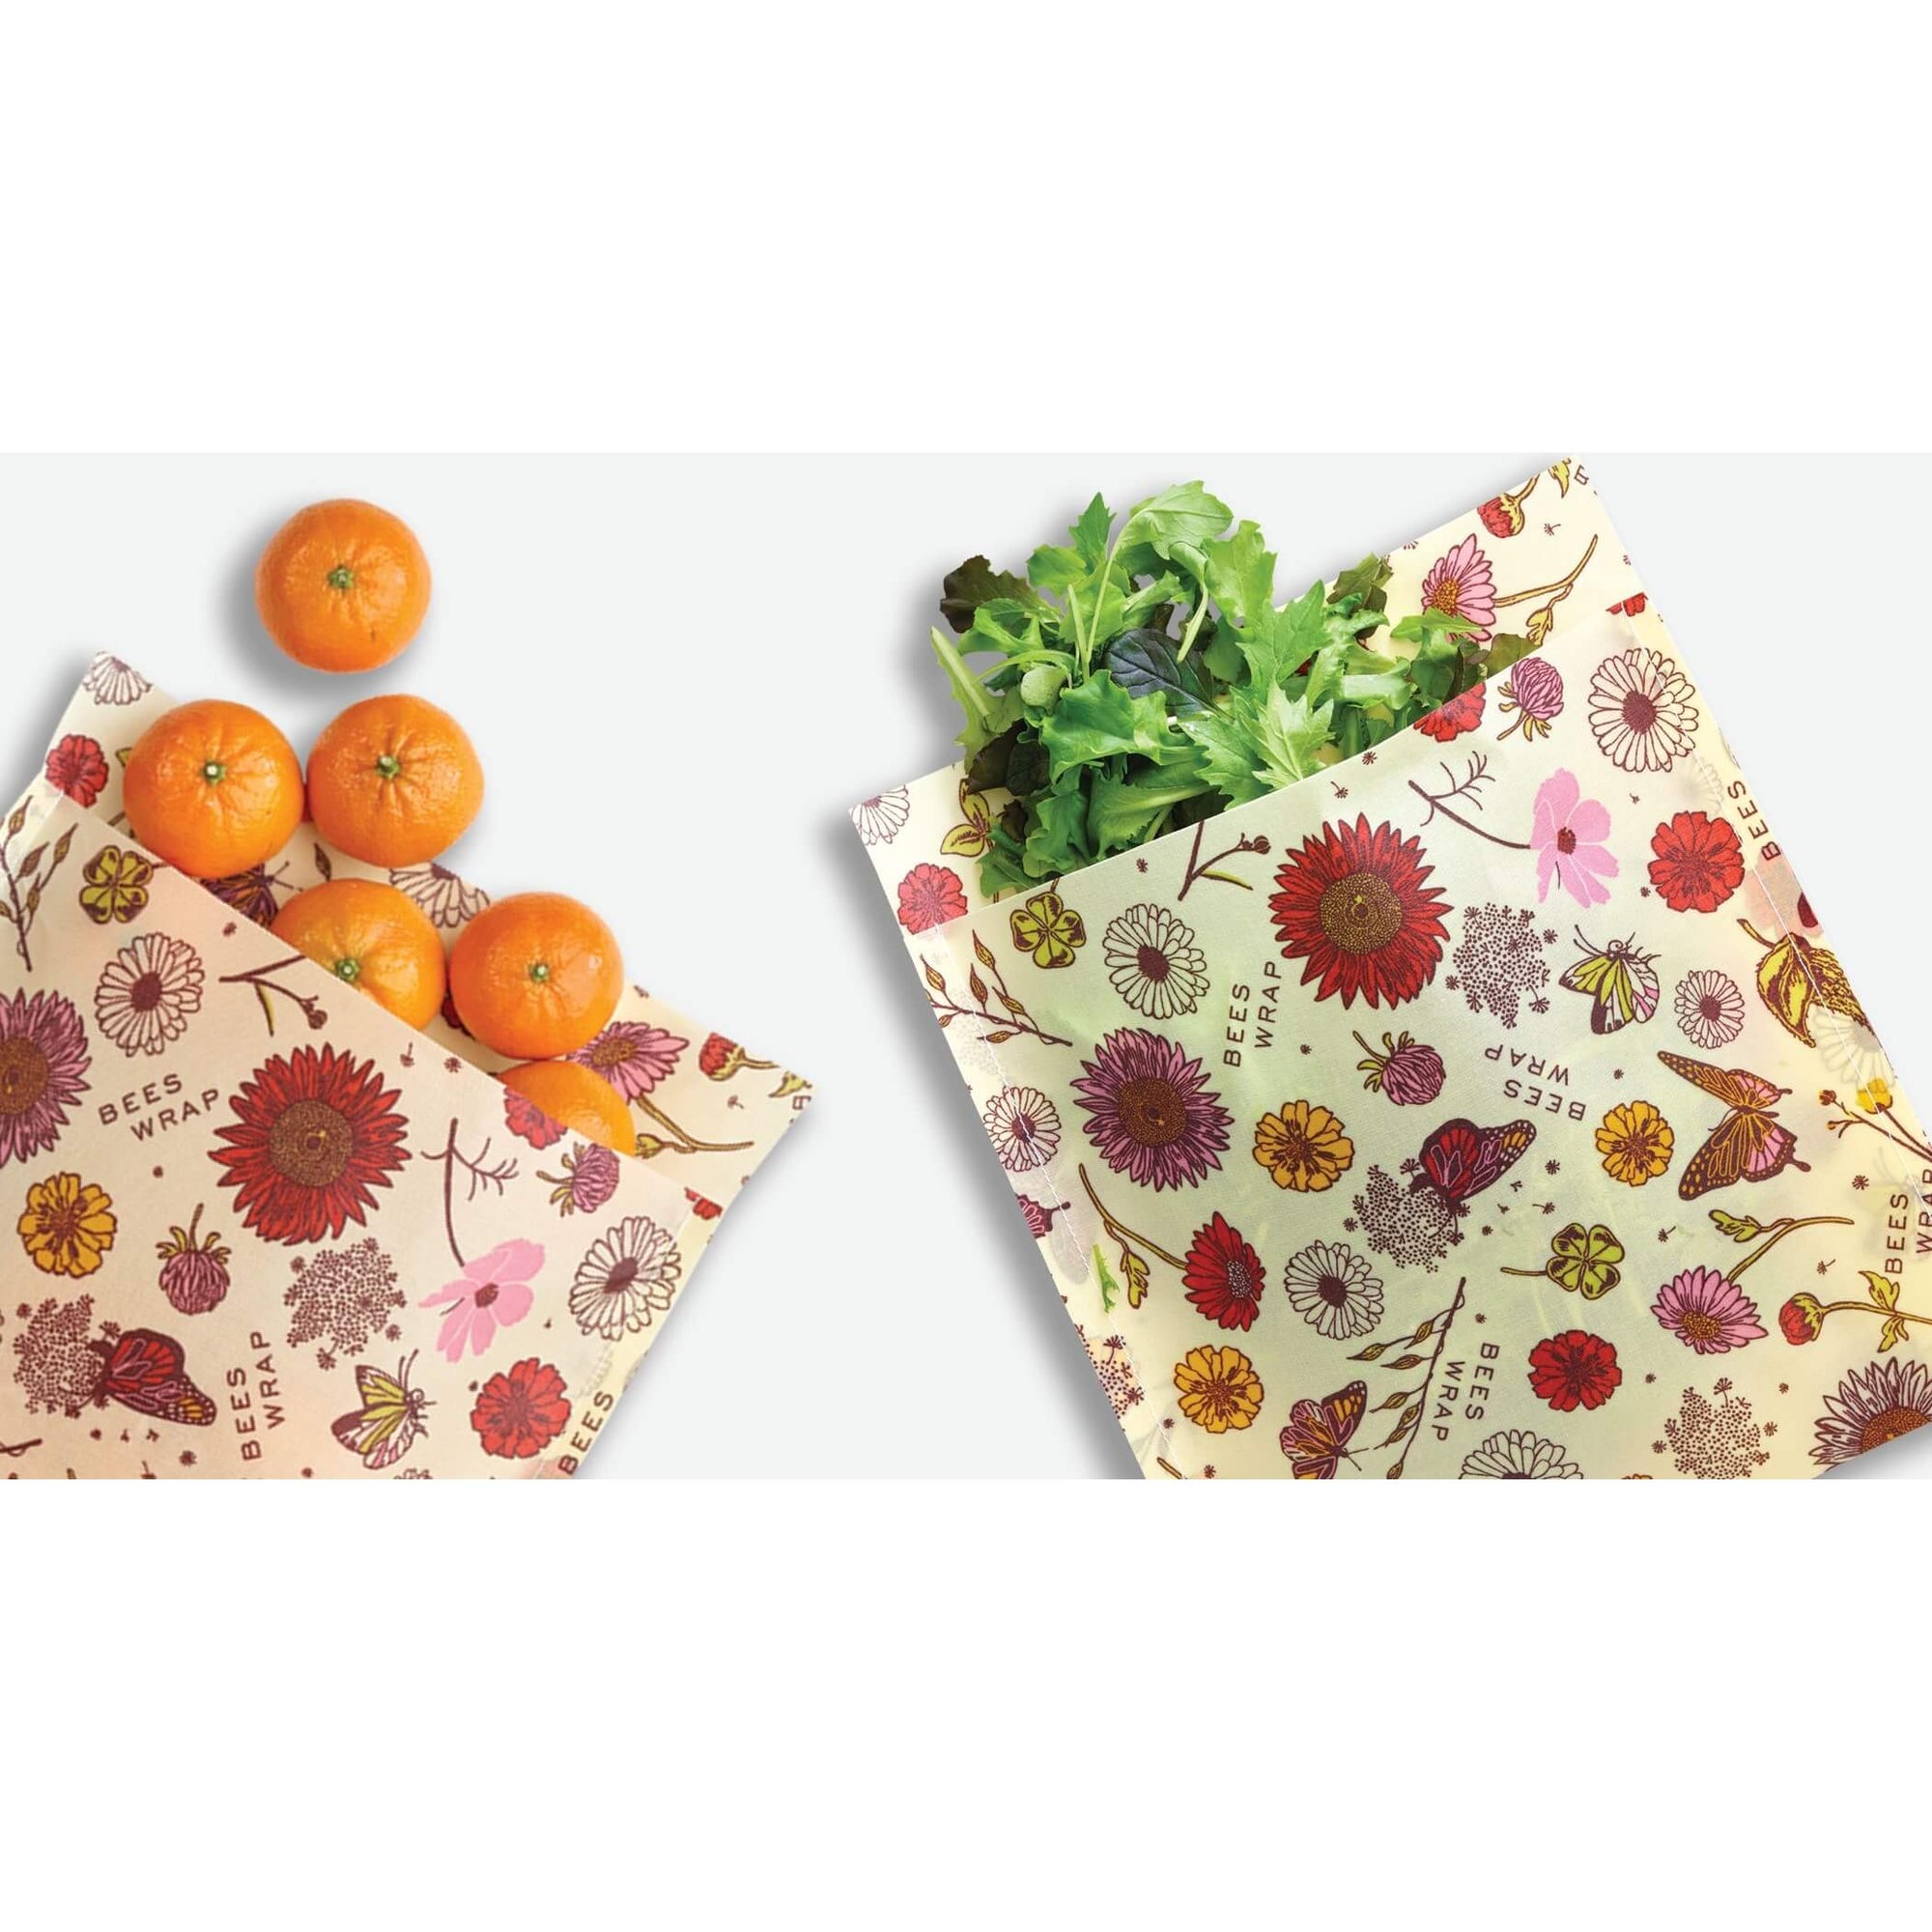 Bee's Wrap - Produce bags